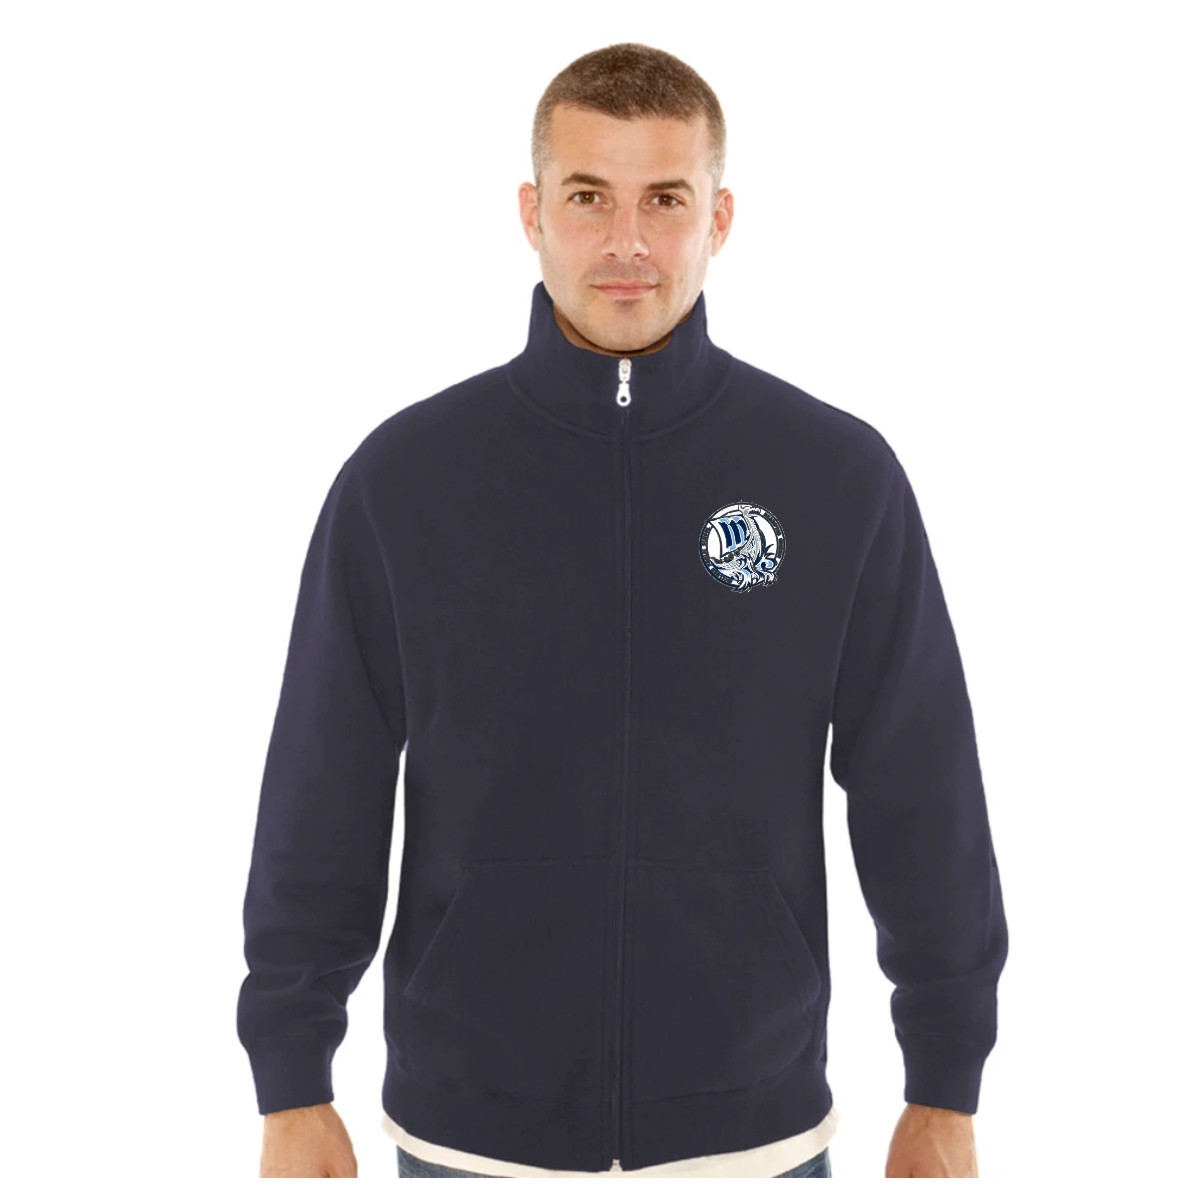 MCP Adult St. Lawrence Jacket - Navy